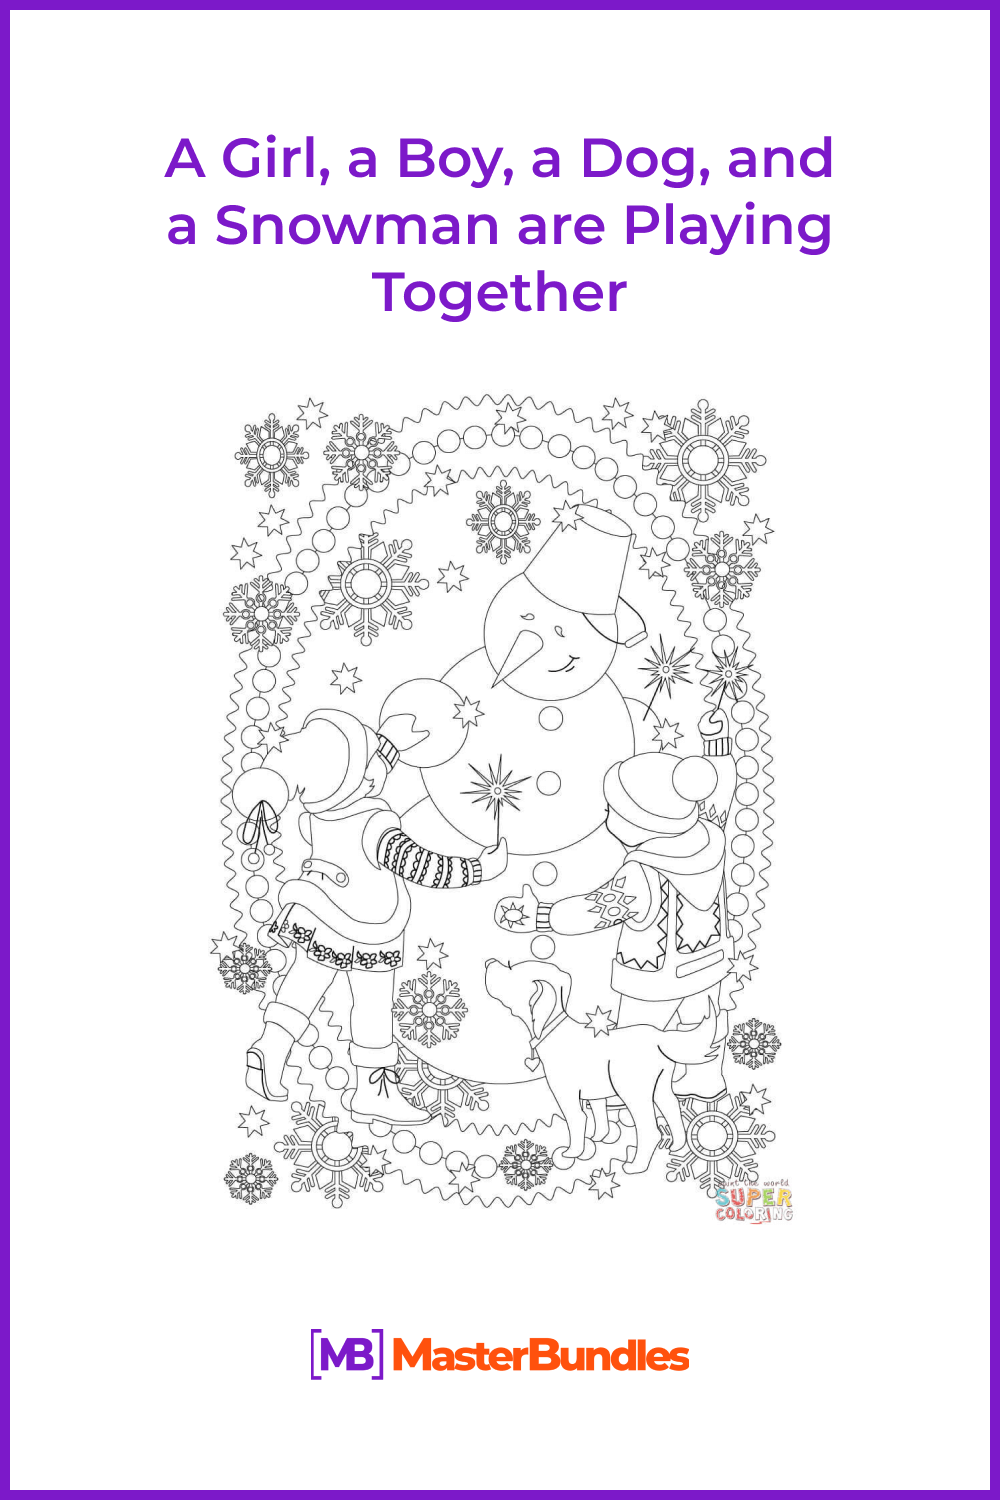 A Girl, a Boy, a Dog, and a Snowman are Playing Together coloring page pinterest image.